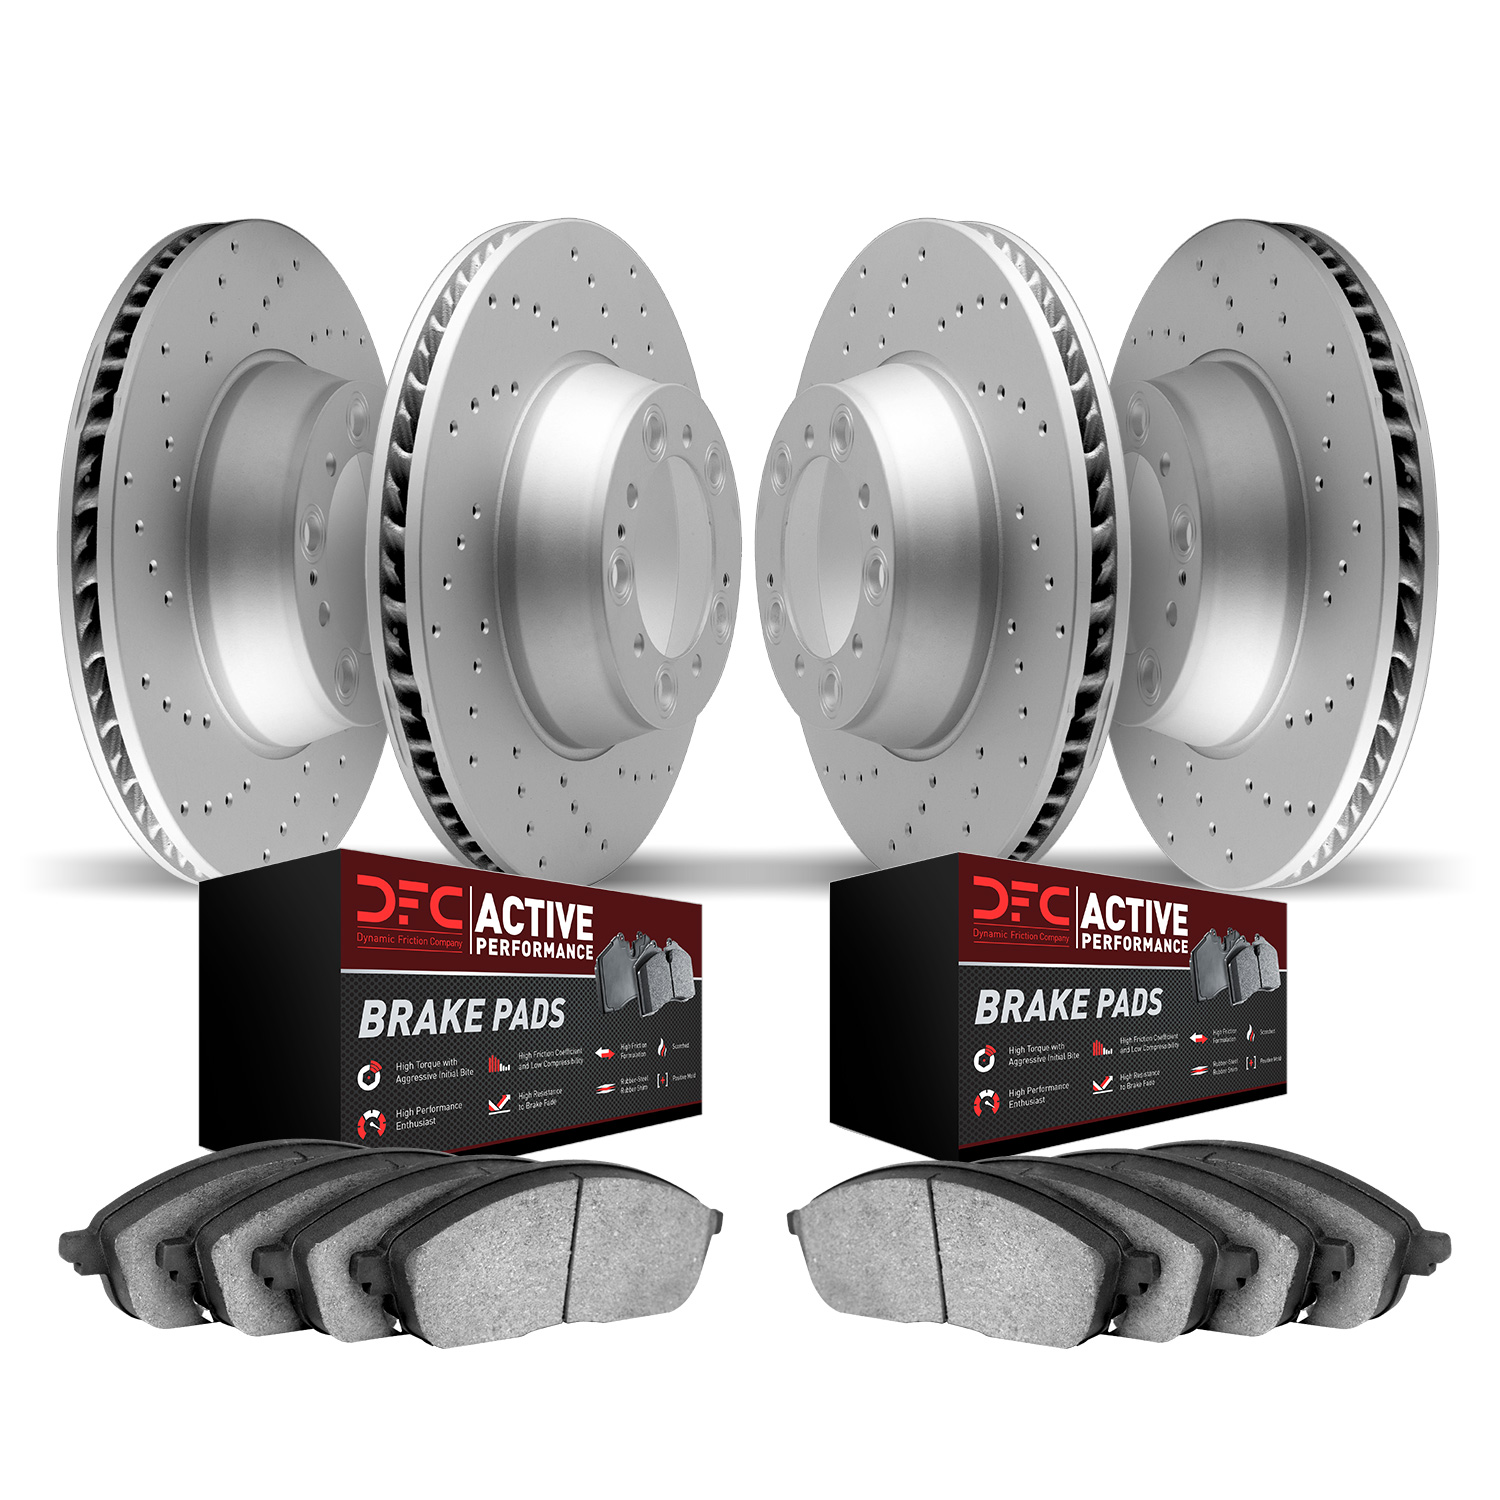 2704-46009 Geoperformance Drilled Brake Rotors with Active Performance Pads Kit, 2003-2008 GM, Position: Front and Rear